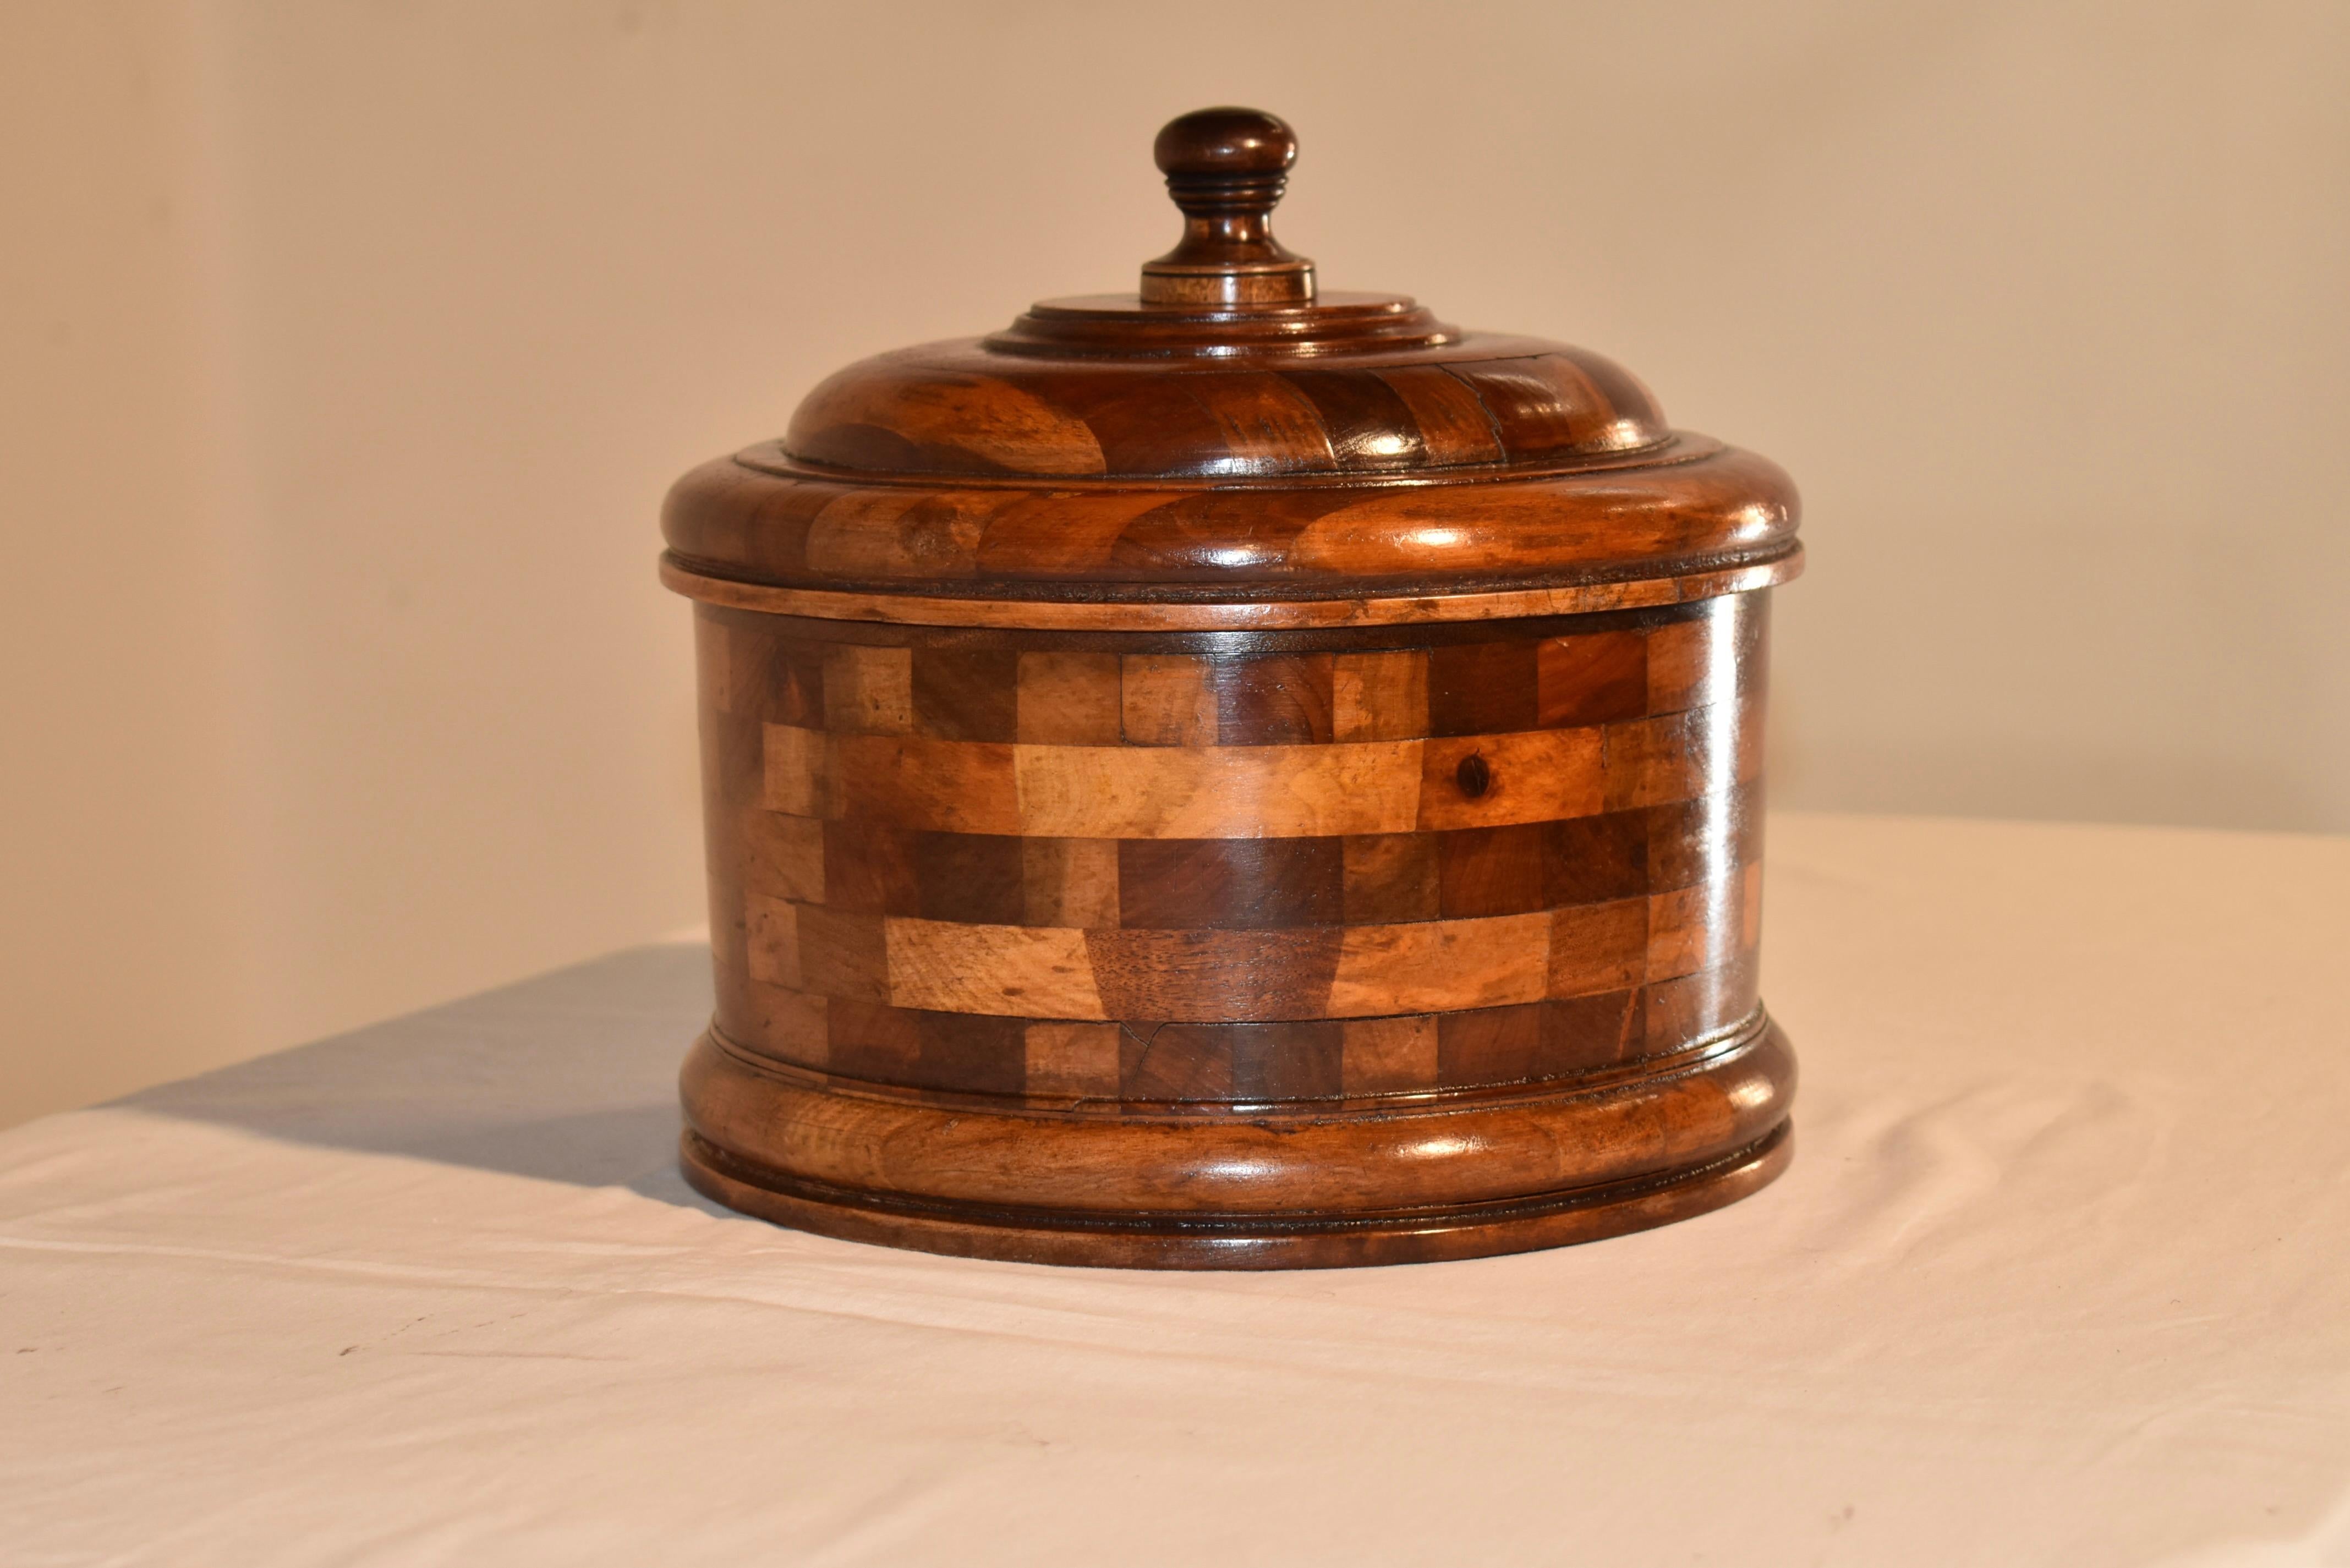 19th century large treen lidded box made from birch, walnut, cherry, mahogany, and oak.  The wood is layered in a design which is very pleasing with contrast of color and shape of each block of wood.  The top has a turned handle and is turned ads